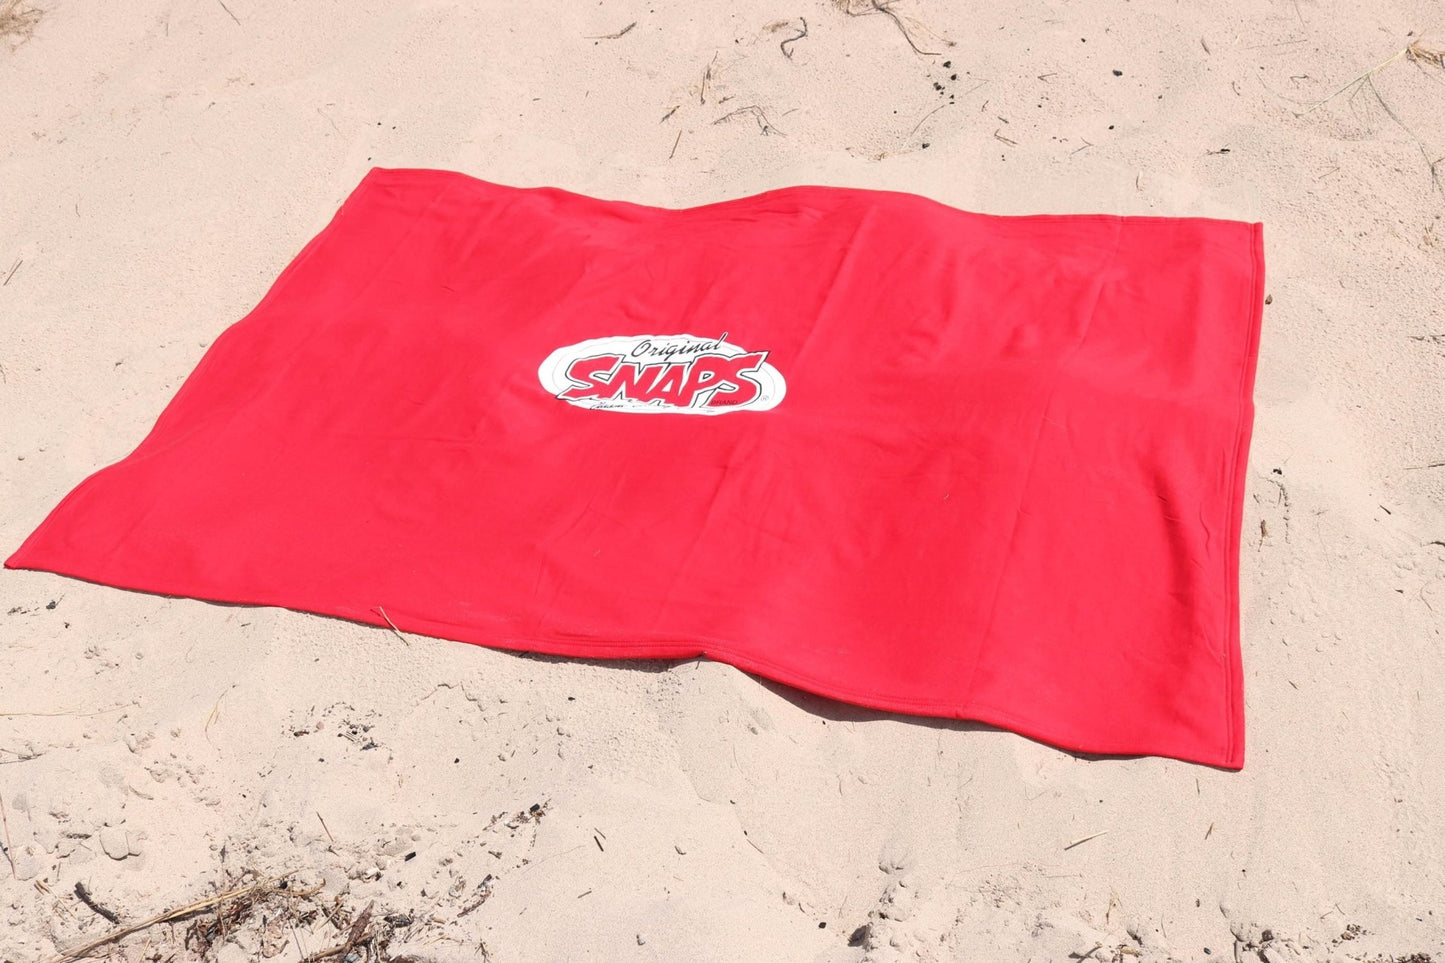 SNAPS Blanket laying on a beach